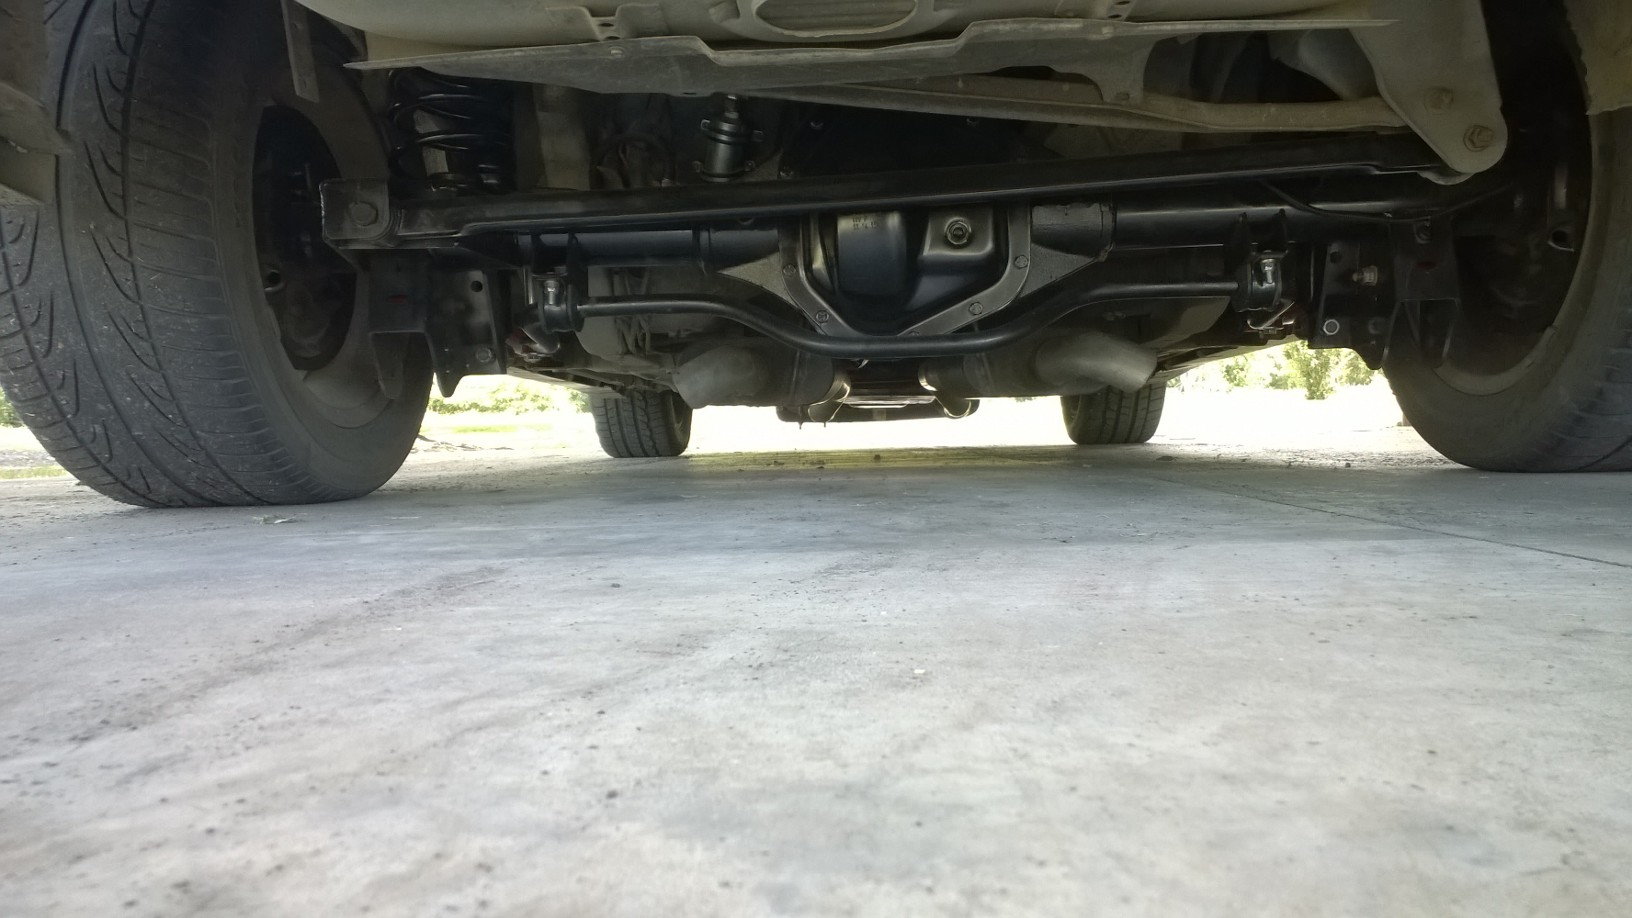 Exhaust dump right before axle? Any issues? - Third Generation F-Body